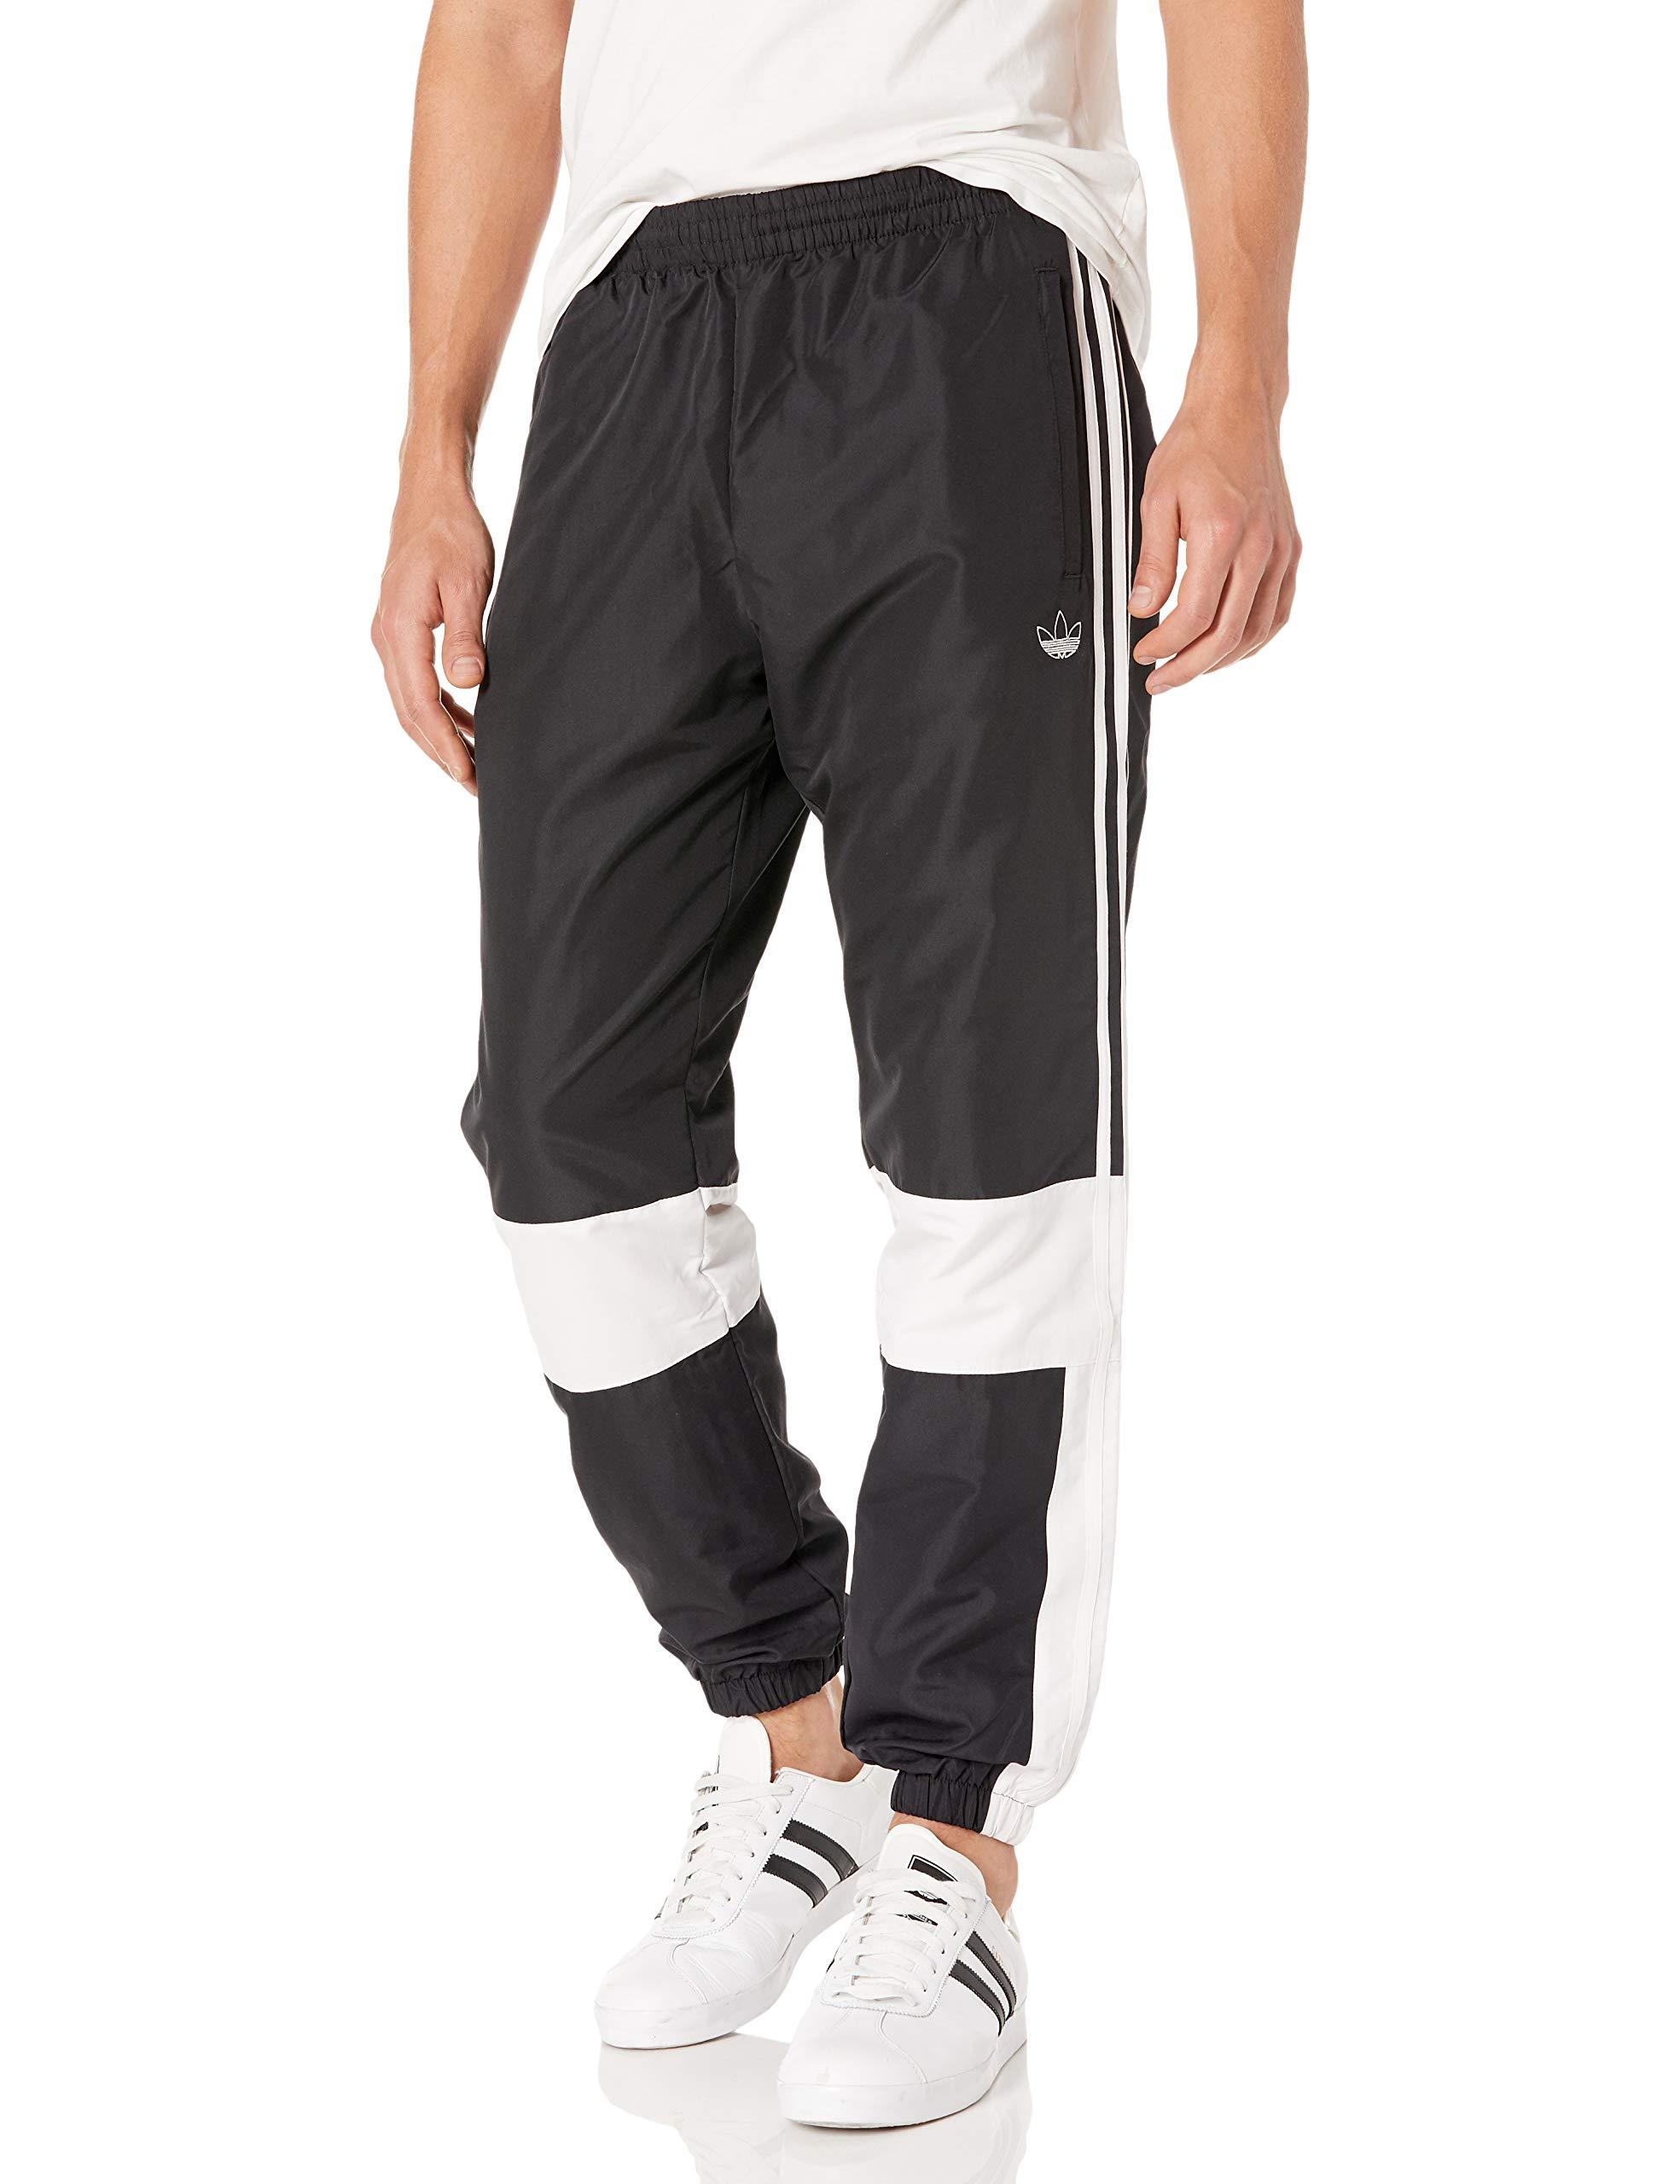 adidas Originals Synthetic Asymm Track Pant in Black/White (Black) for Men  - Lyst